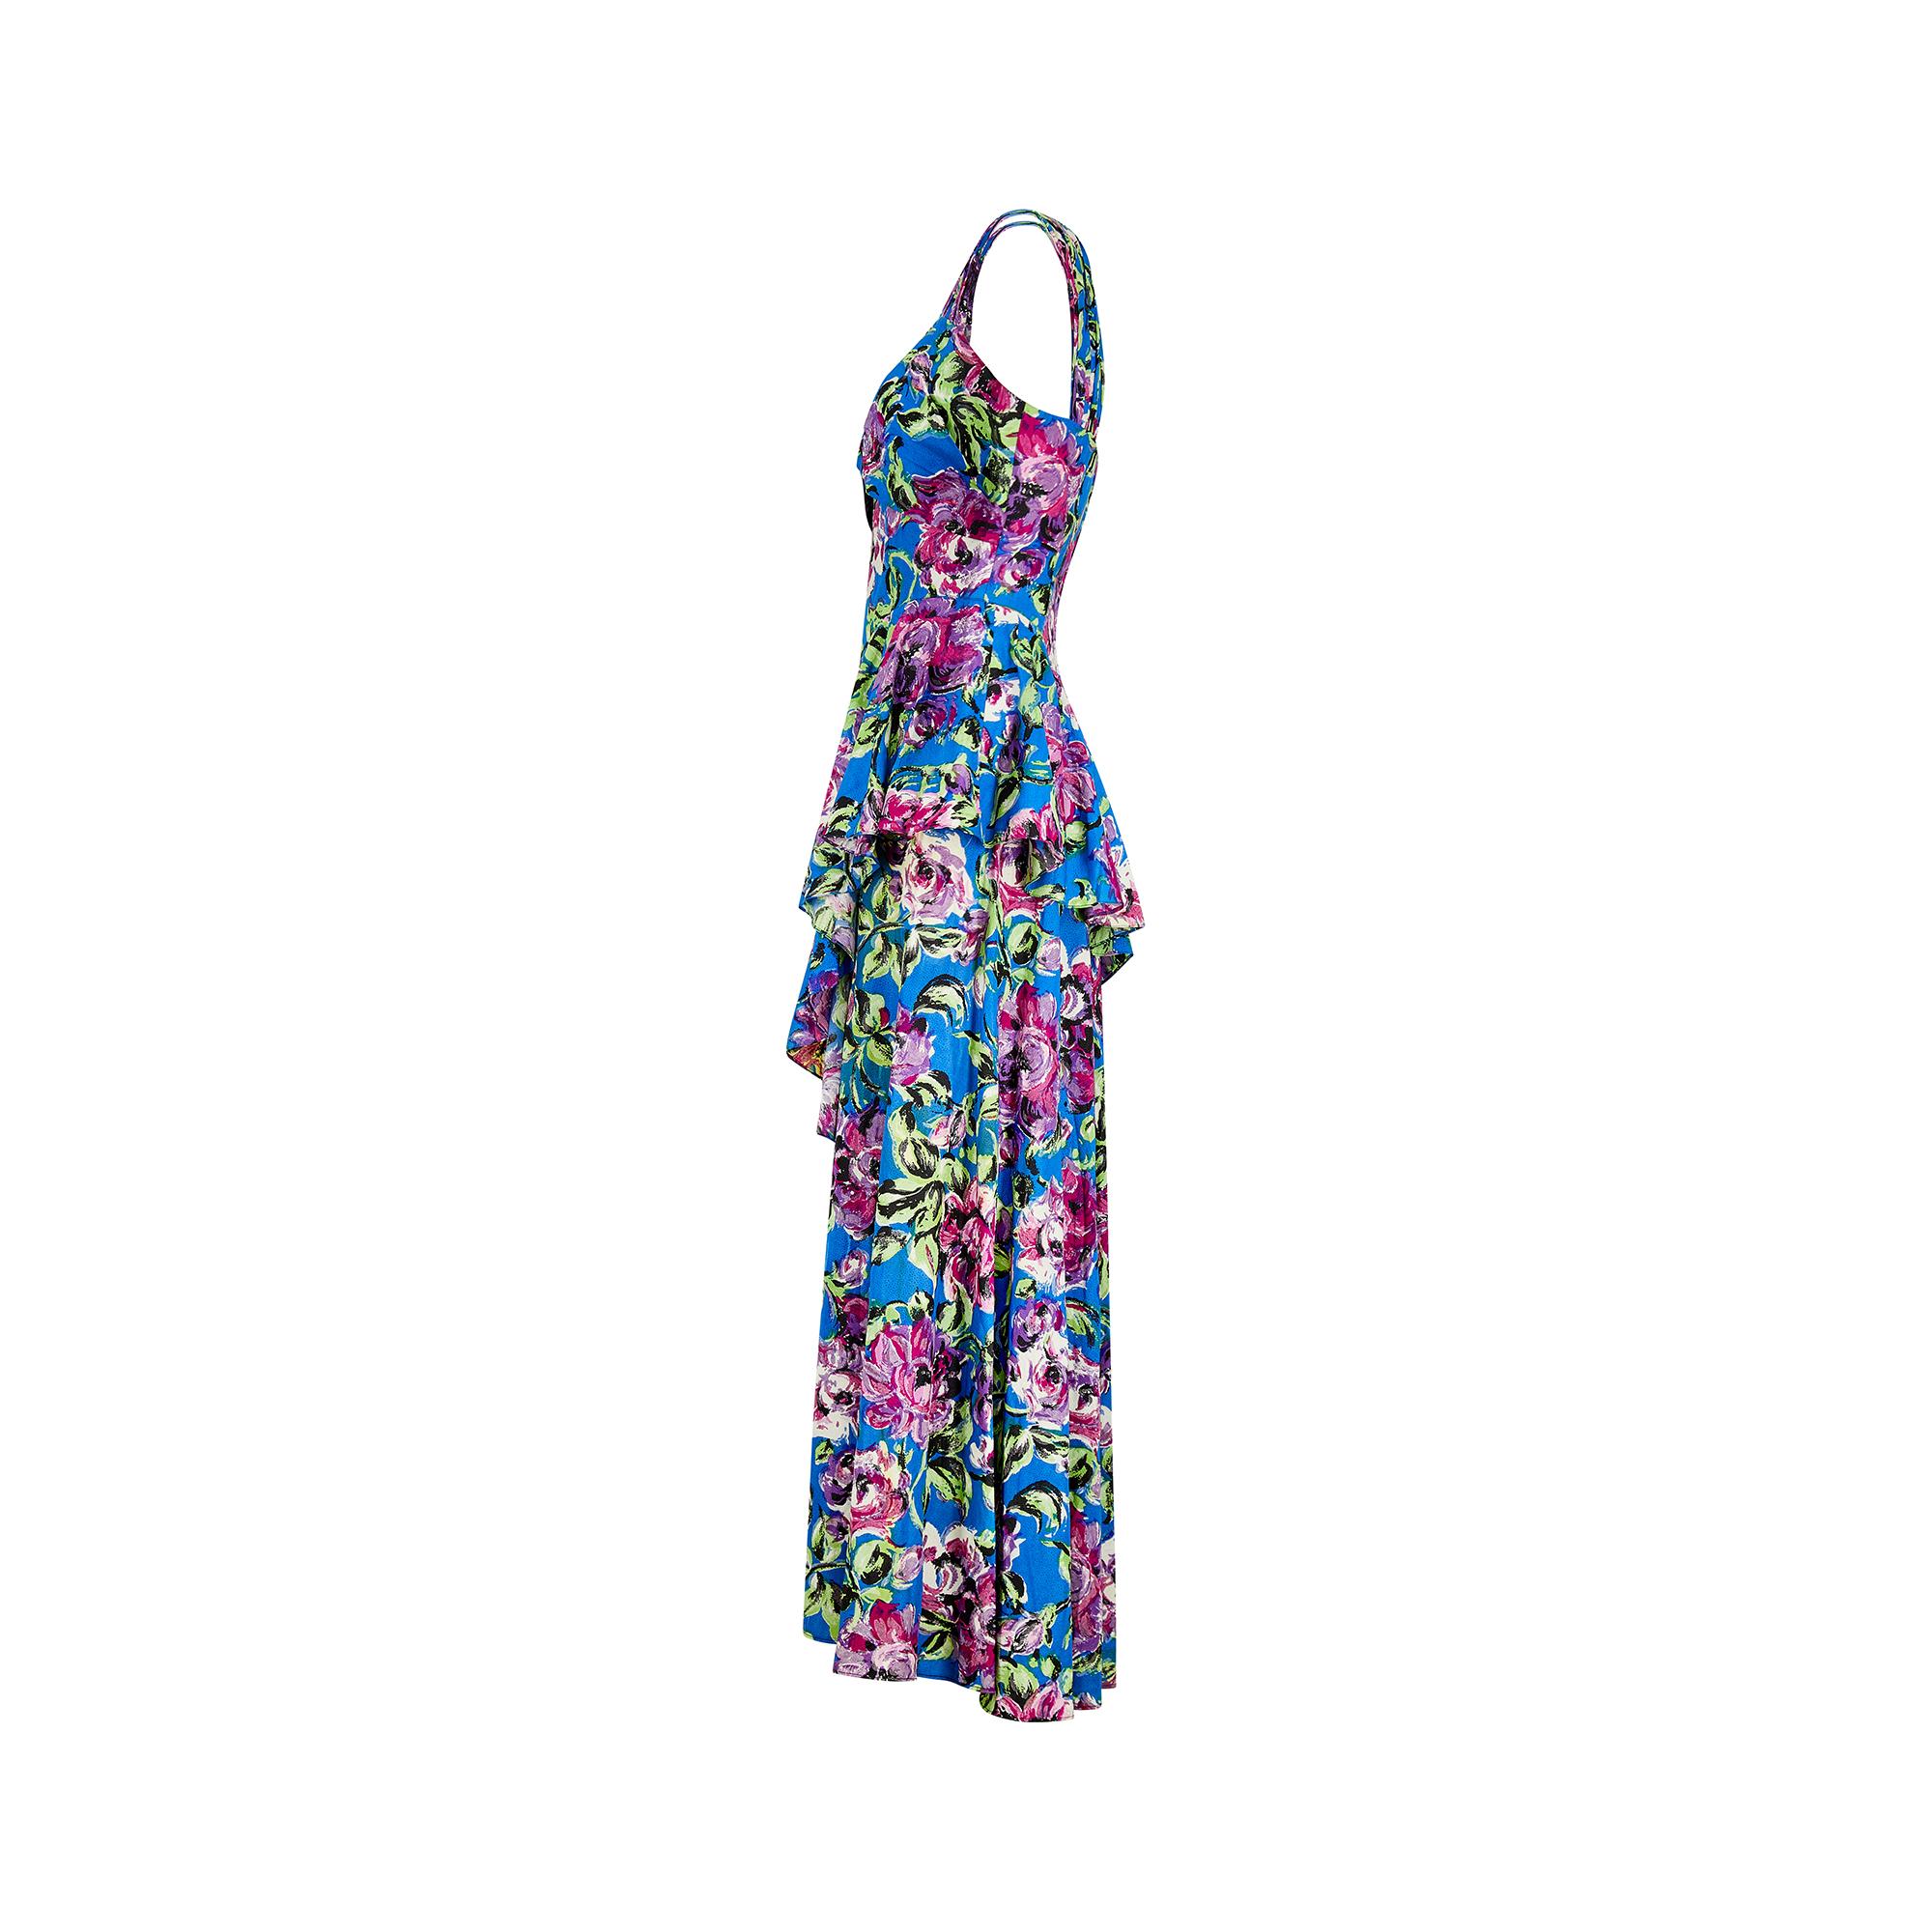 A floral maxi dress, done with that distinct 1940s elegance and would work well for both day and evening event wear. The lightweight cloth is an early textured viscose with a subtle speckled finish when looked at up close. It is patterned with bold,